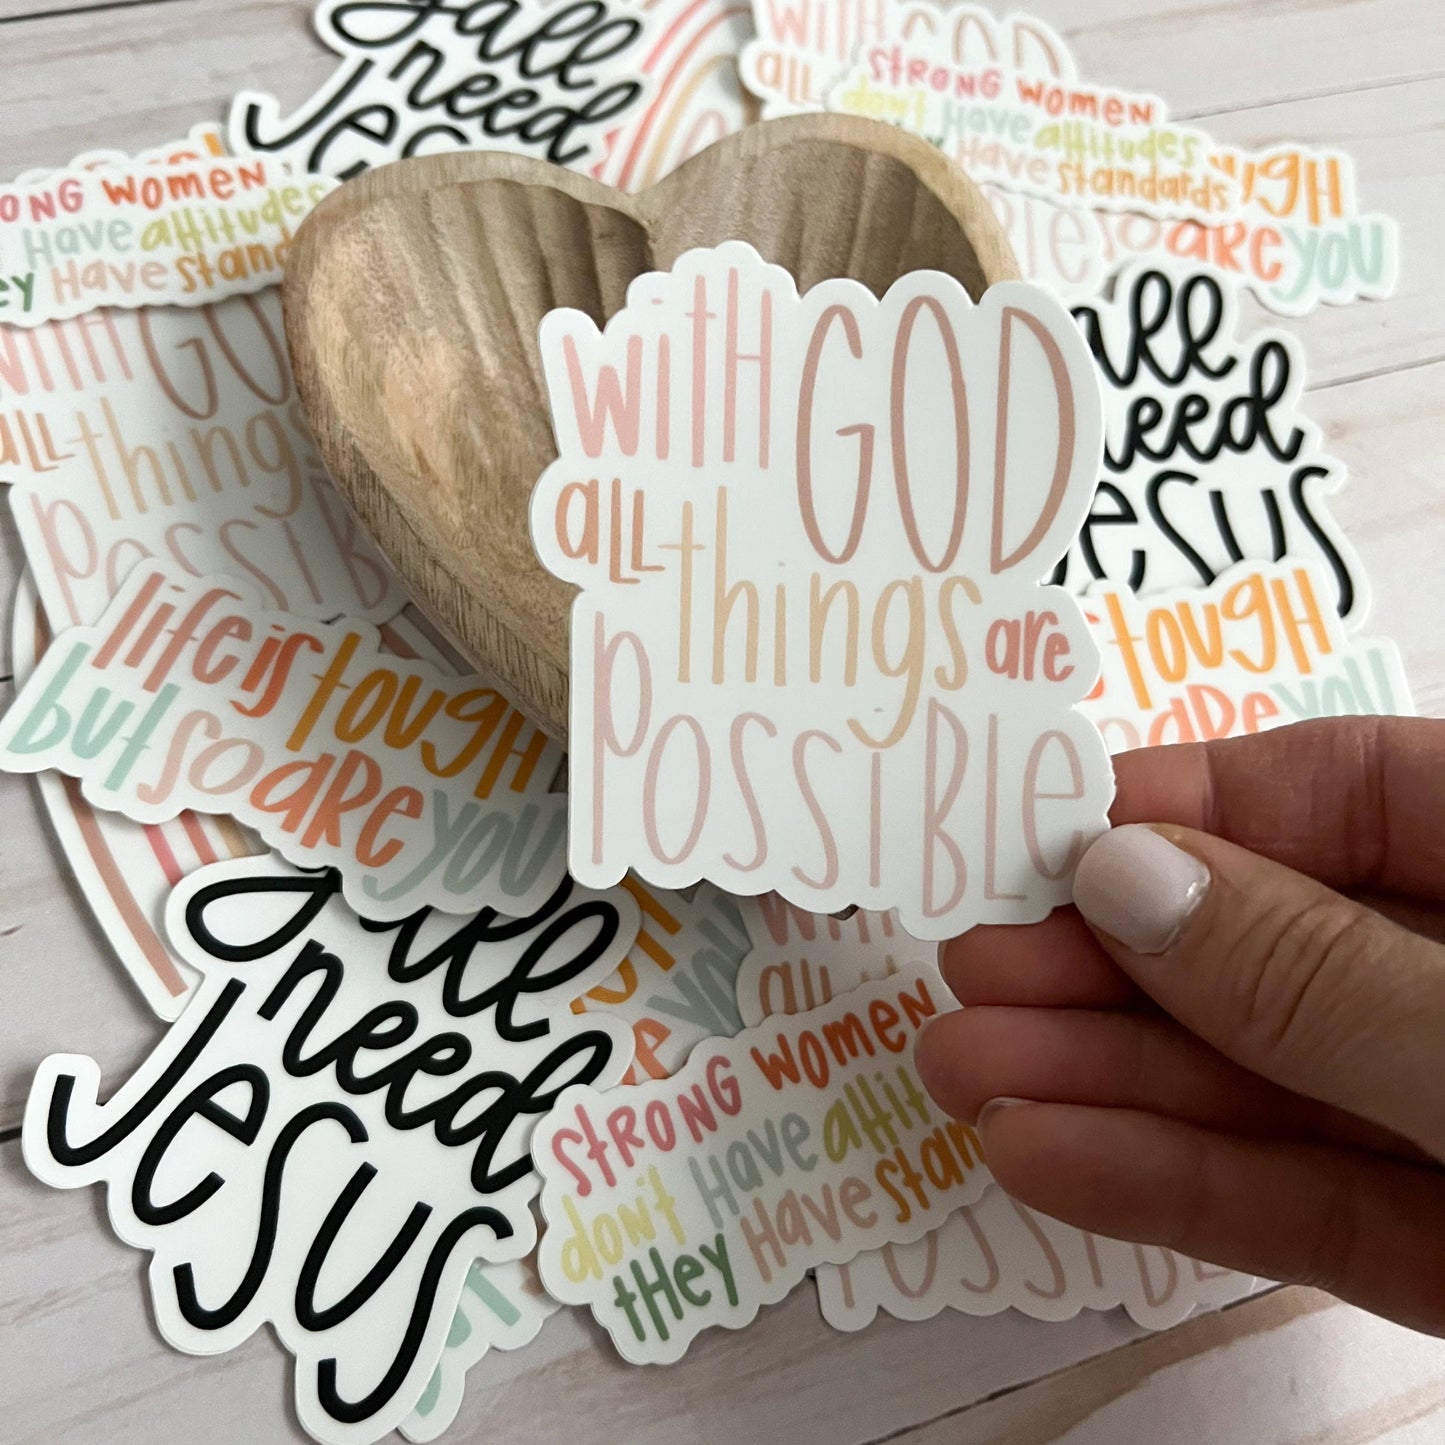 Matthew 19:26 Sticker *FREE SHIPPING with any order over $10